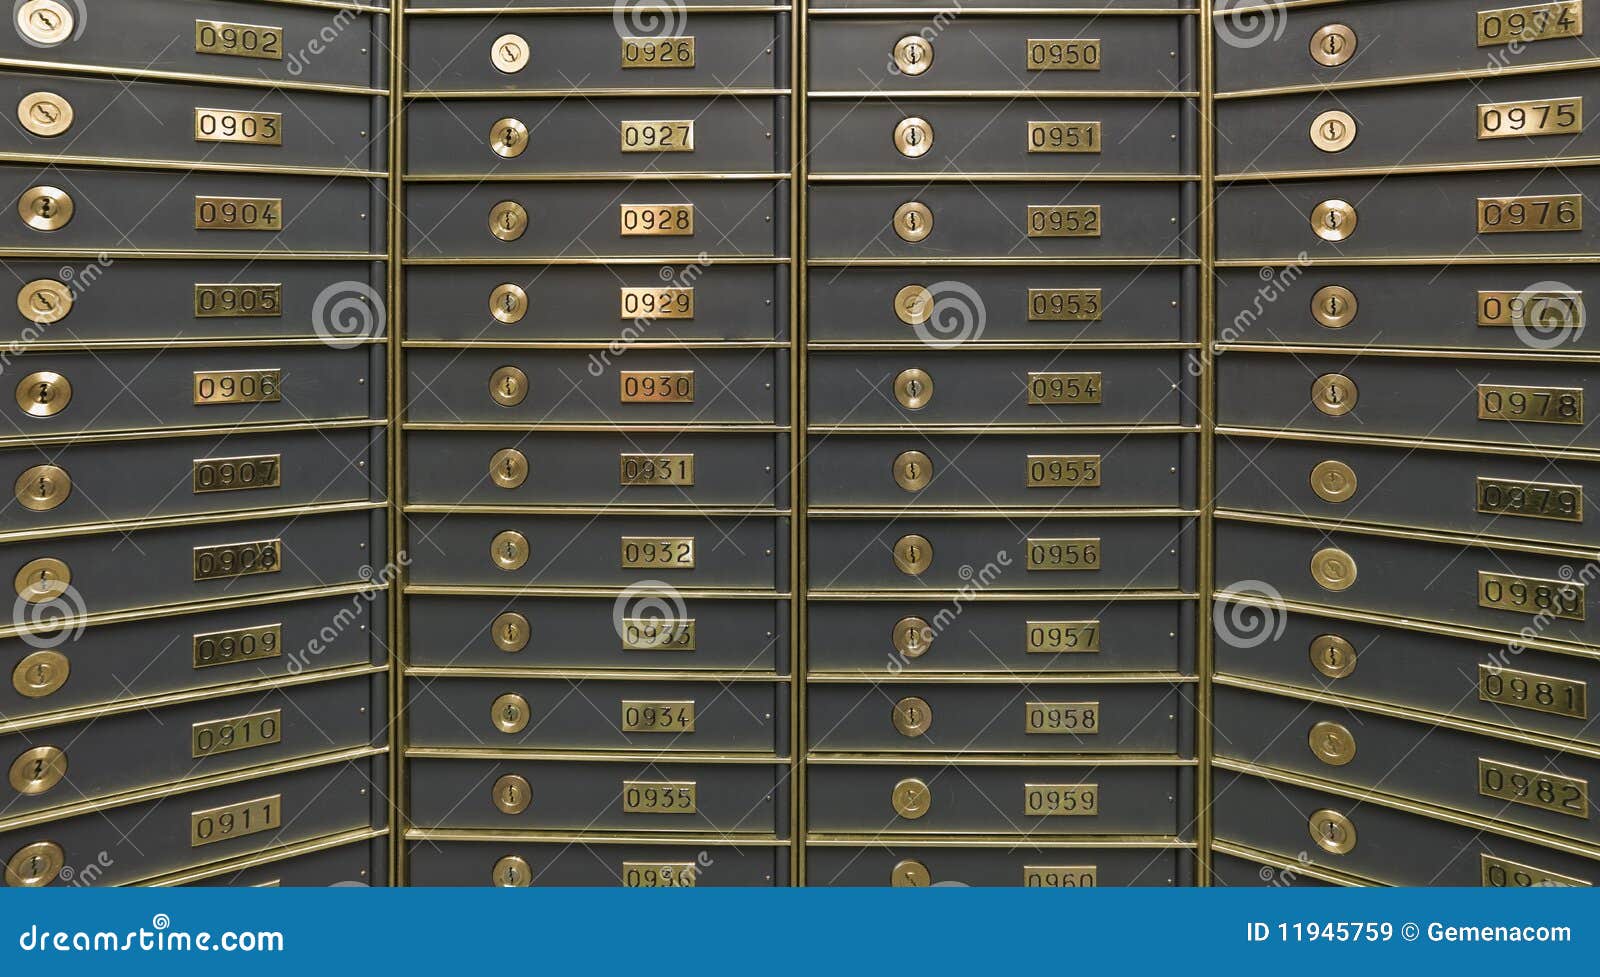 rows of luxurious safe deposit boxes